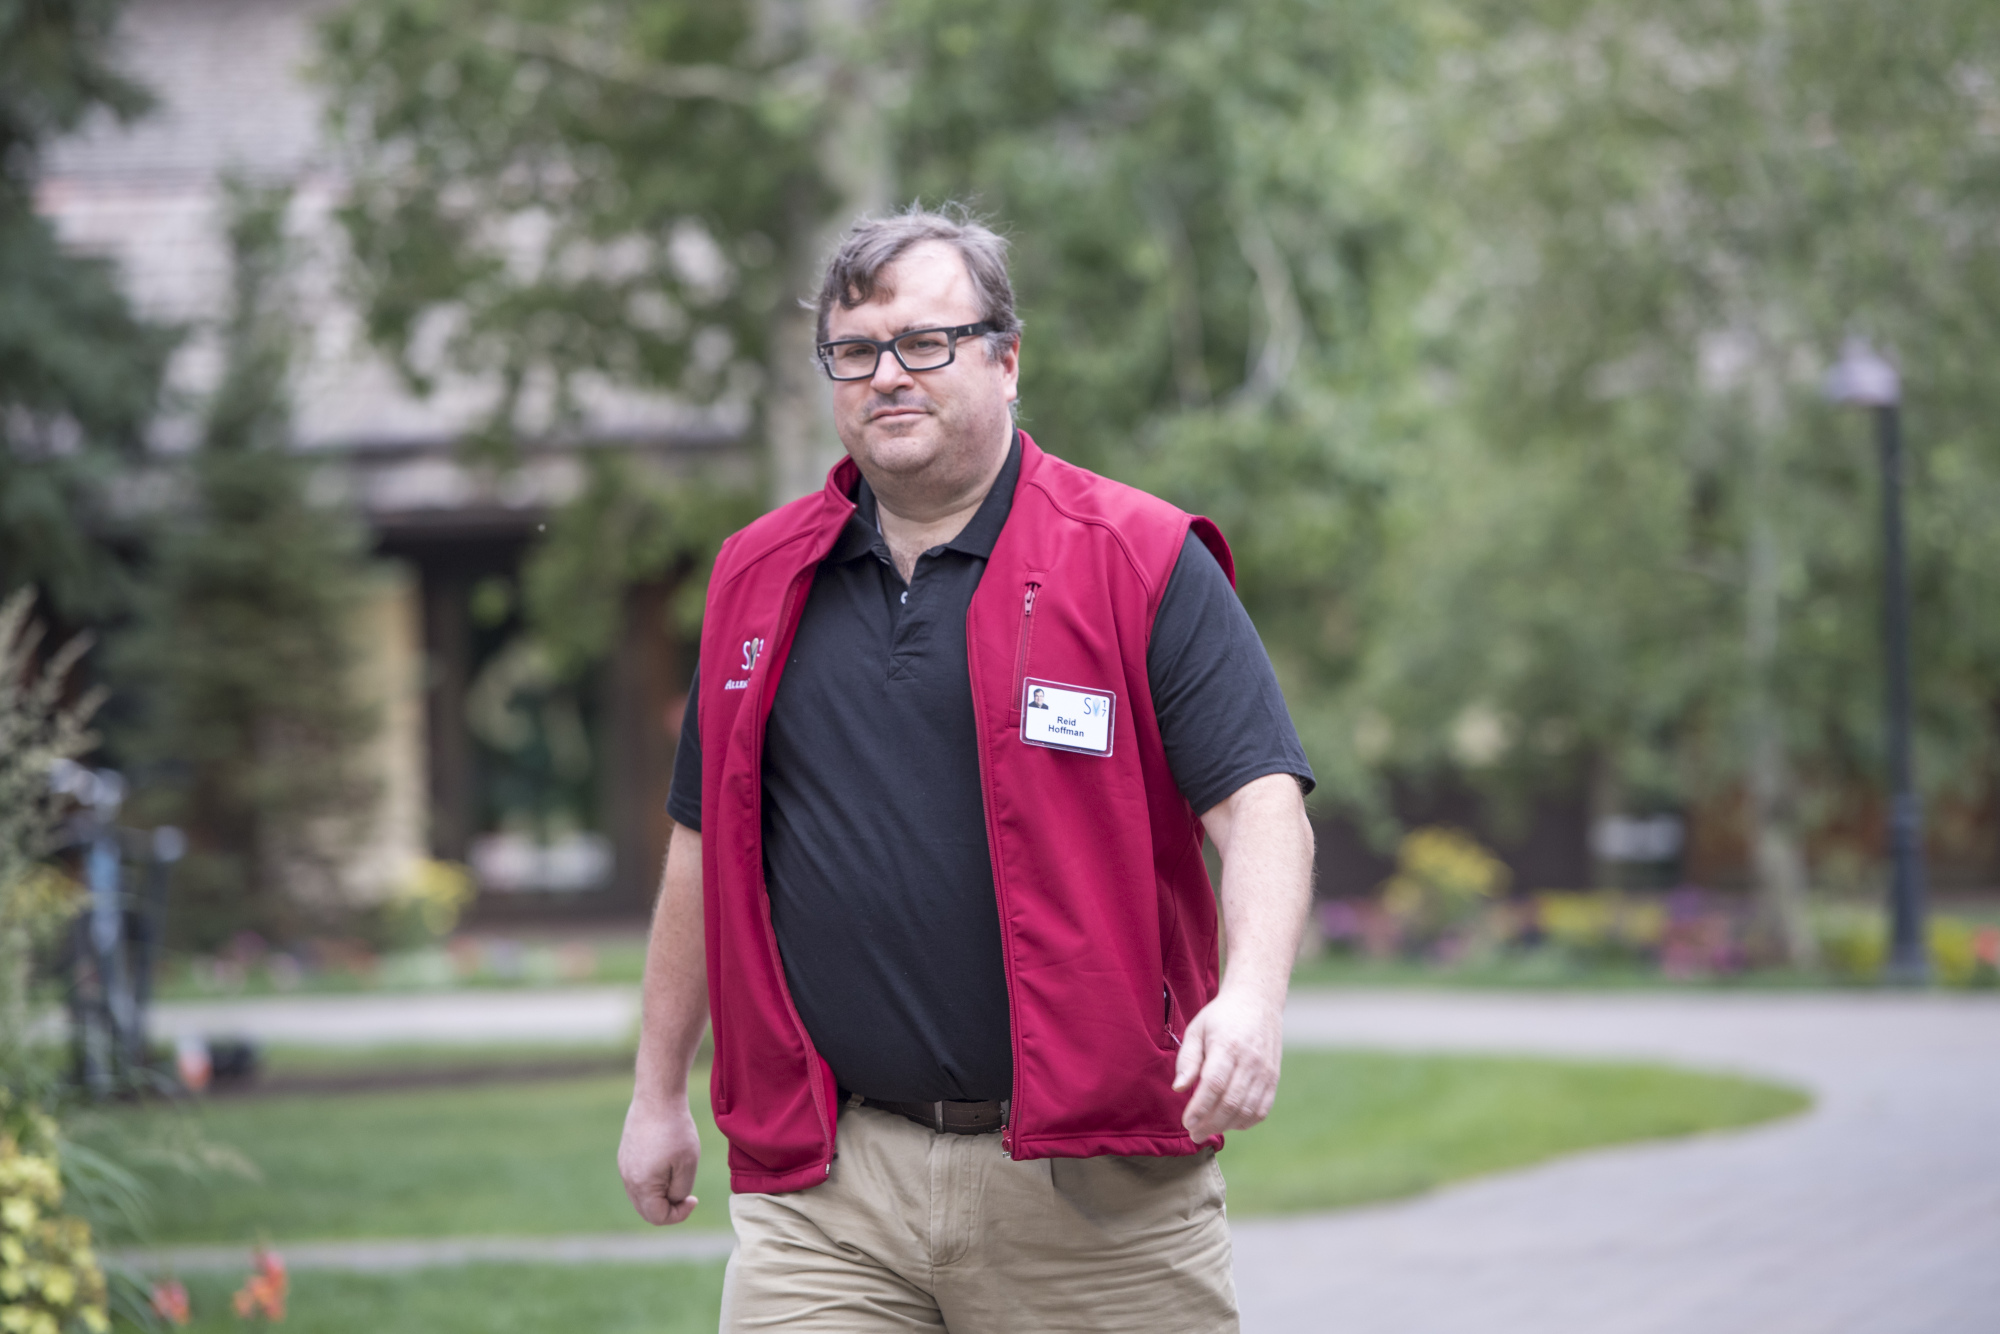 Reid Hoffman, co-founder of LinkedIn Corp., arrives for the morning sessions during the Allen & Co. Media and Technology conference in Sun Valley, Idaho, U.S., on Friday, July 14, 2017. The 34th annual Allen & Co. conference gathers many of America's wealthiest and most powerful people in media, technology, and sports.